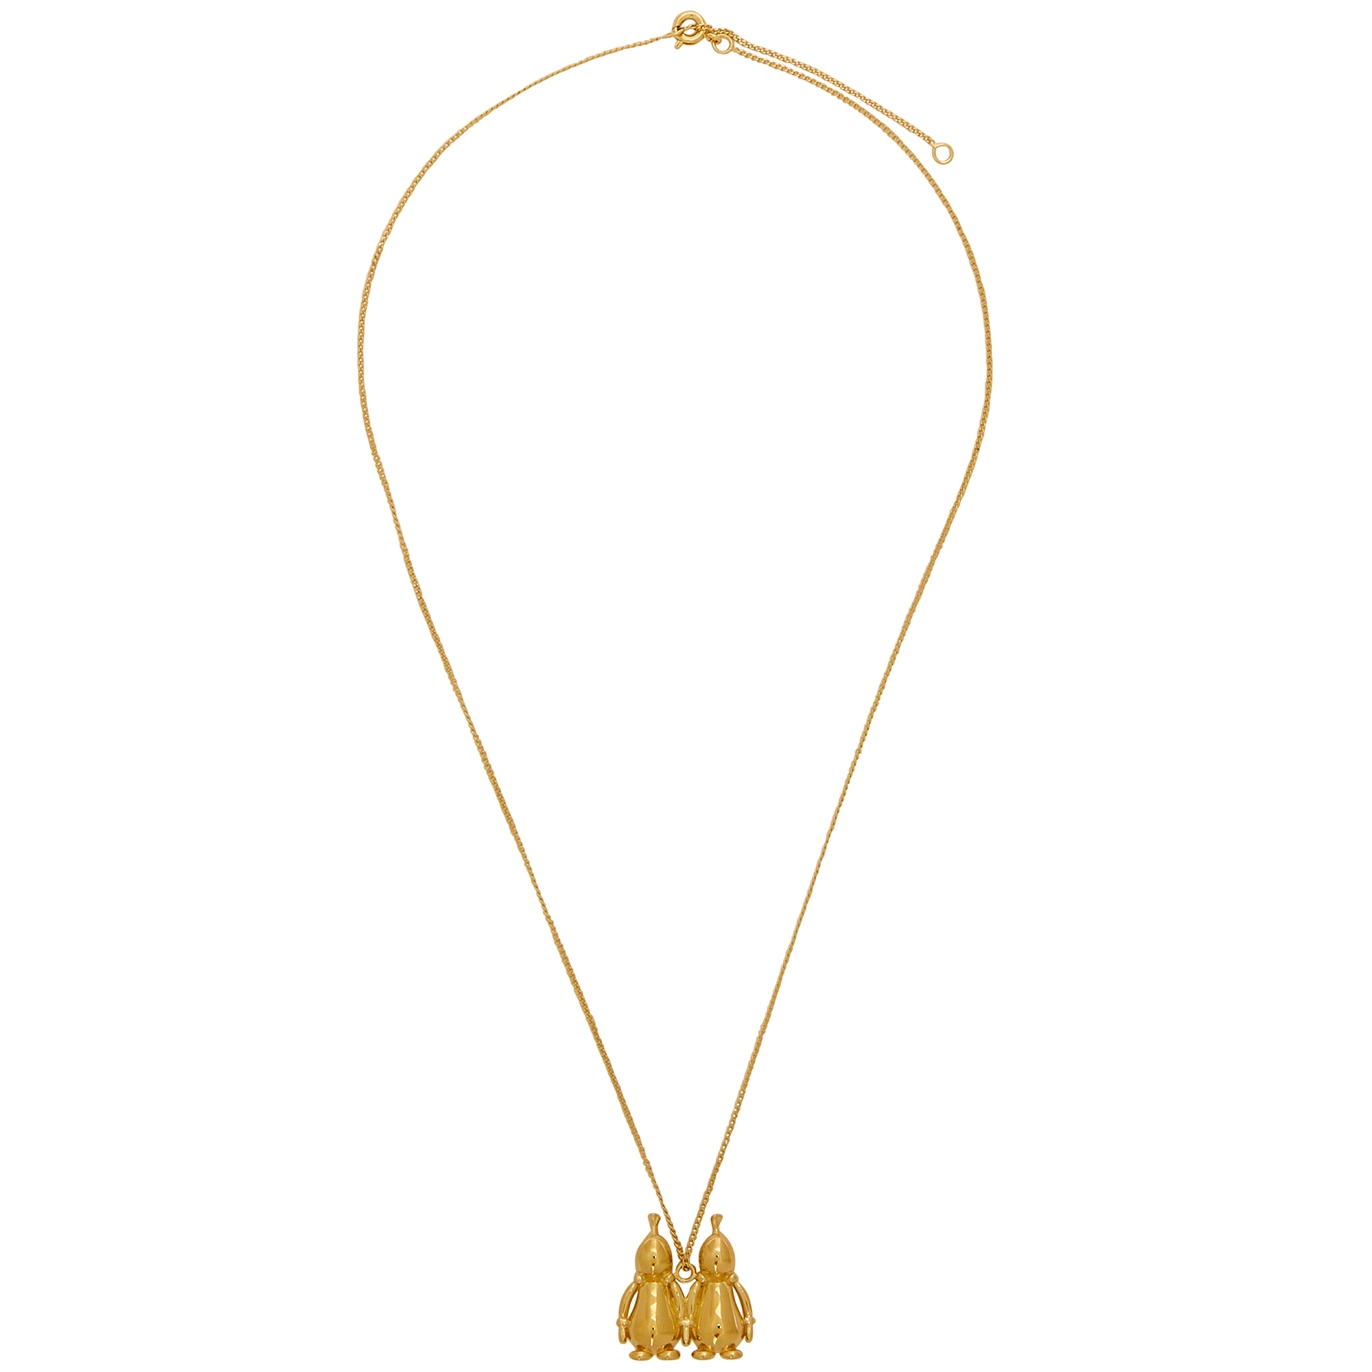 Completedworks Gemini Zodiac Balloon 14kt Gold-plated Necklace - One Size